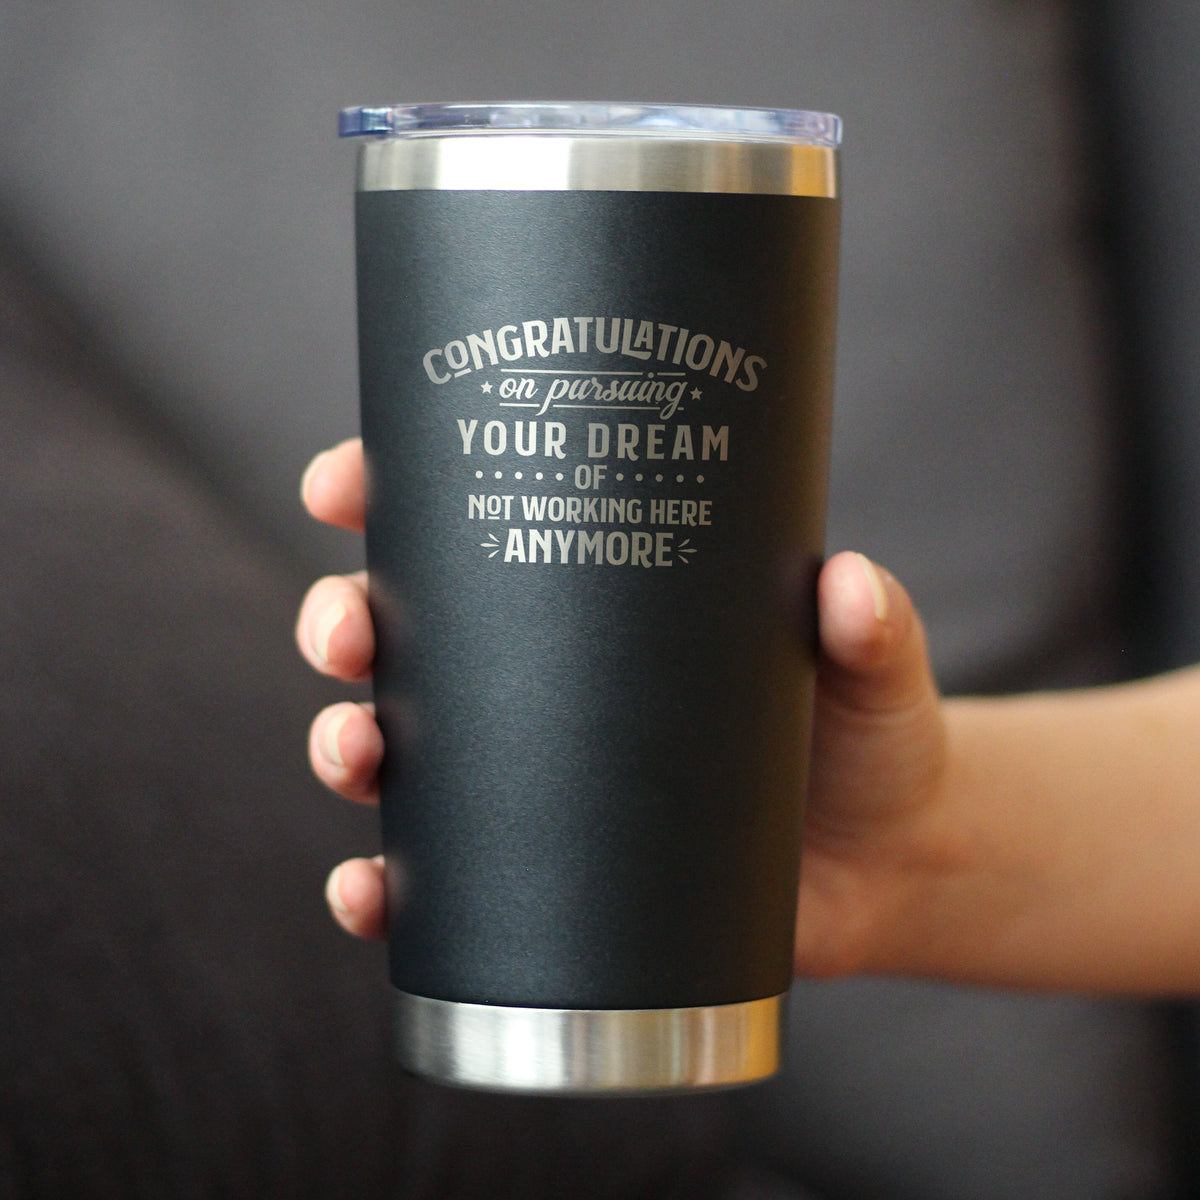 Congratulations on Pursuing Your Dream - Insulated Coffee Tumbler Cup with Sliding Lid - Stainless Steel Insulated Mug - Funny Boss or Coworker Leaving Gift